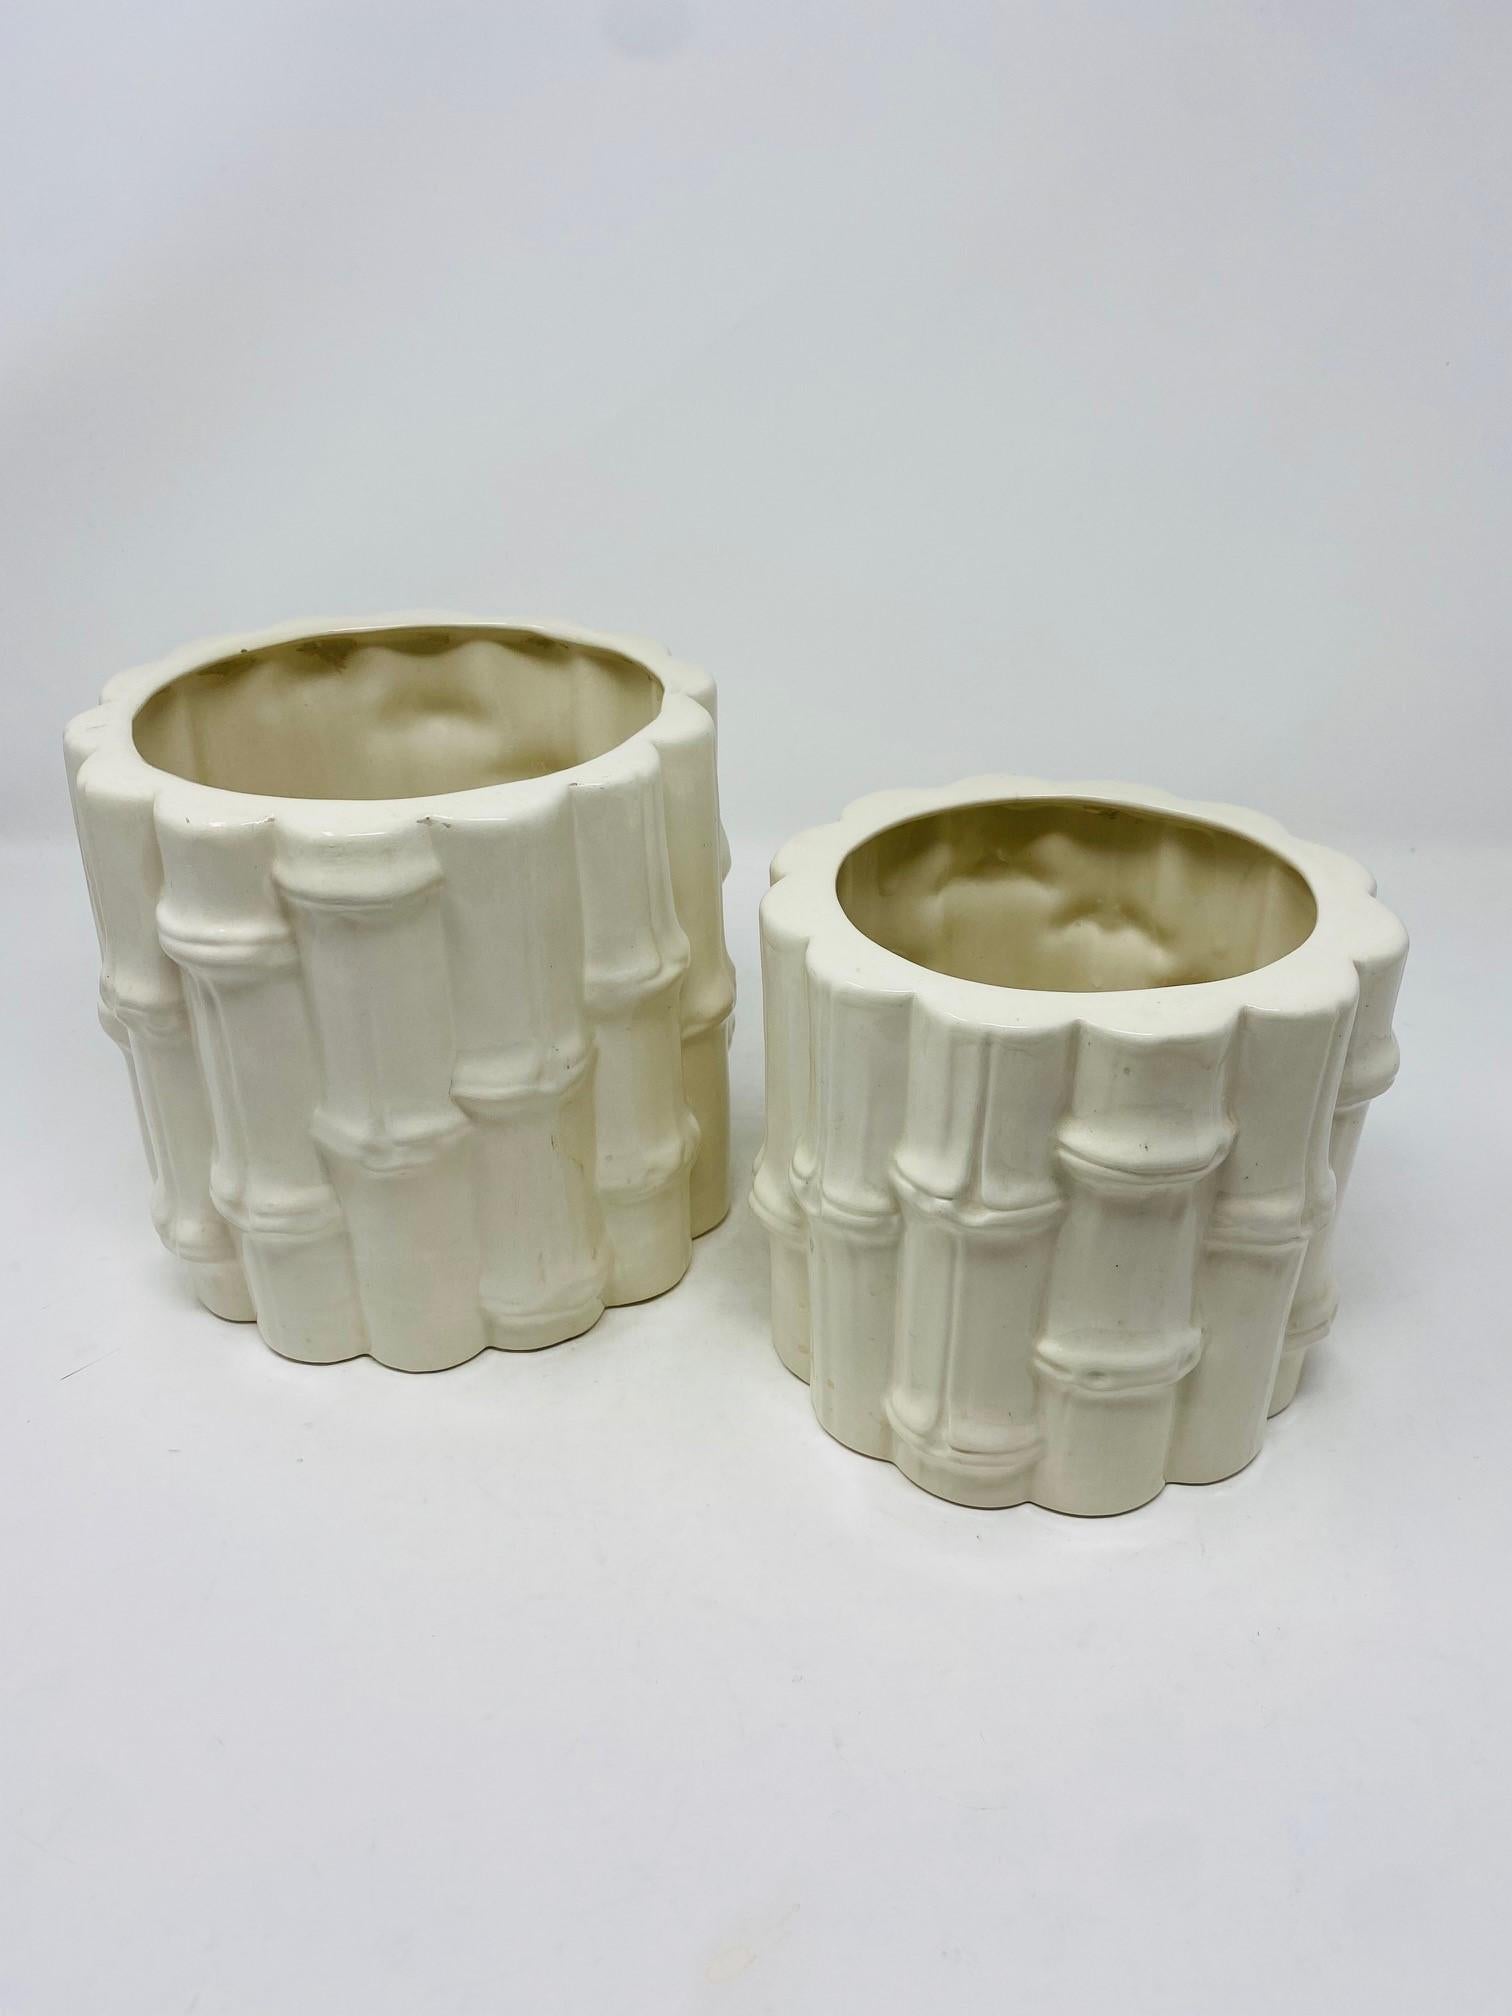 Beautiful set of ceramic majolica bamboo style vases.  This beautiful set provides two different sizes that will appeal to your decor.  Beautifully finished in a style that evokes bamboo in a beautiful ceramic white glaze.  With it's two different